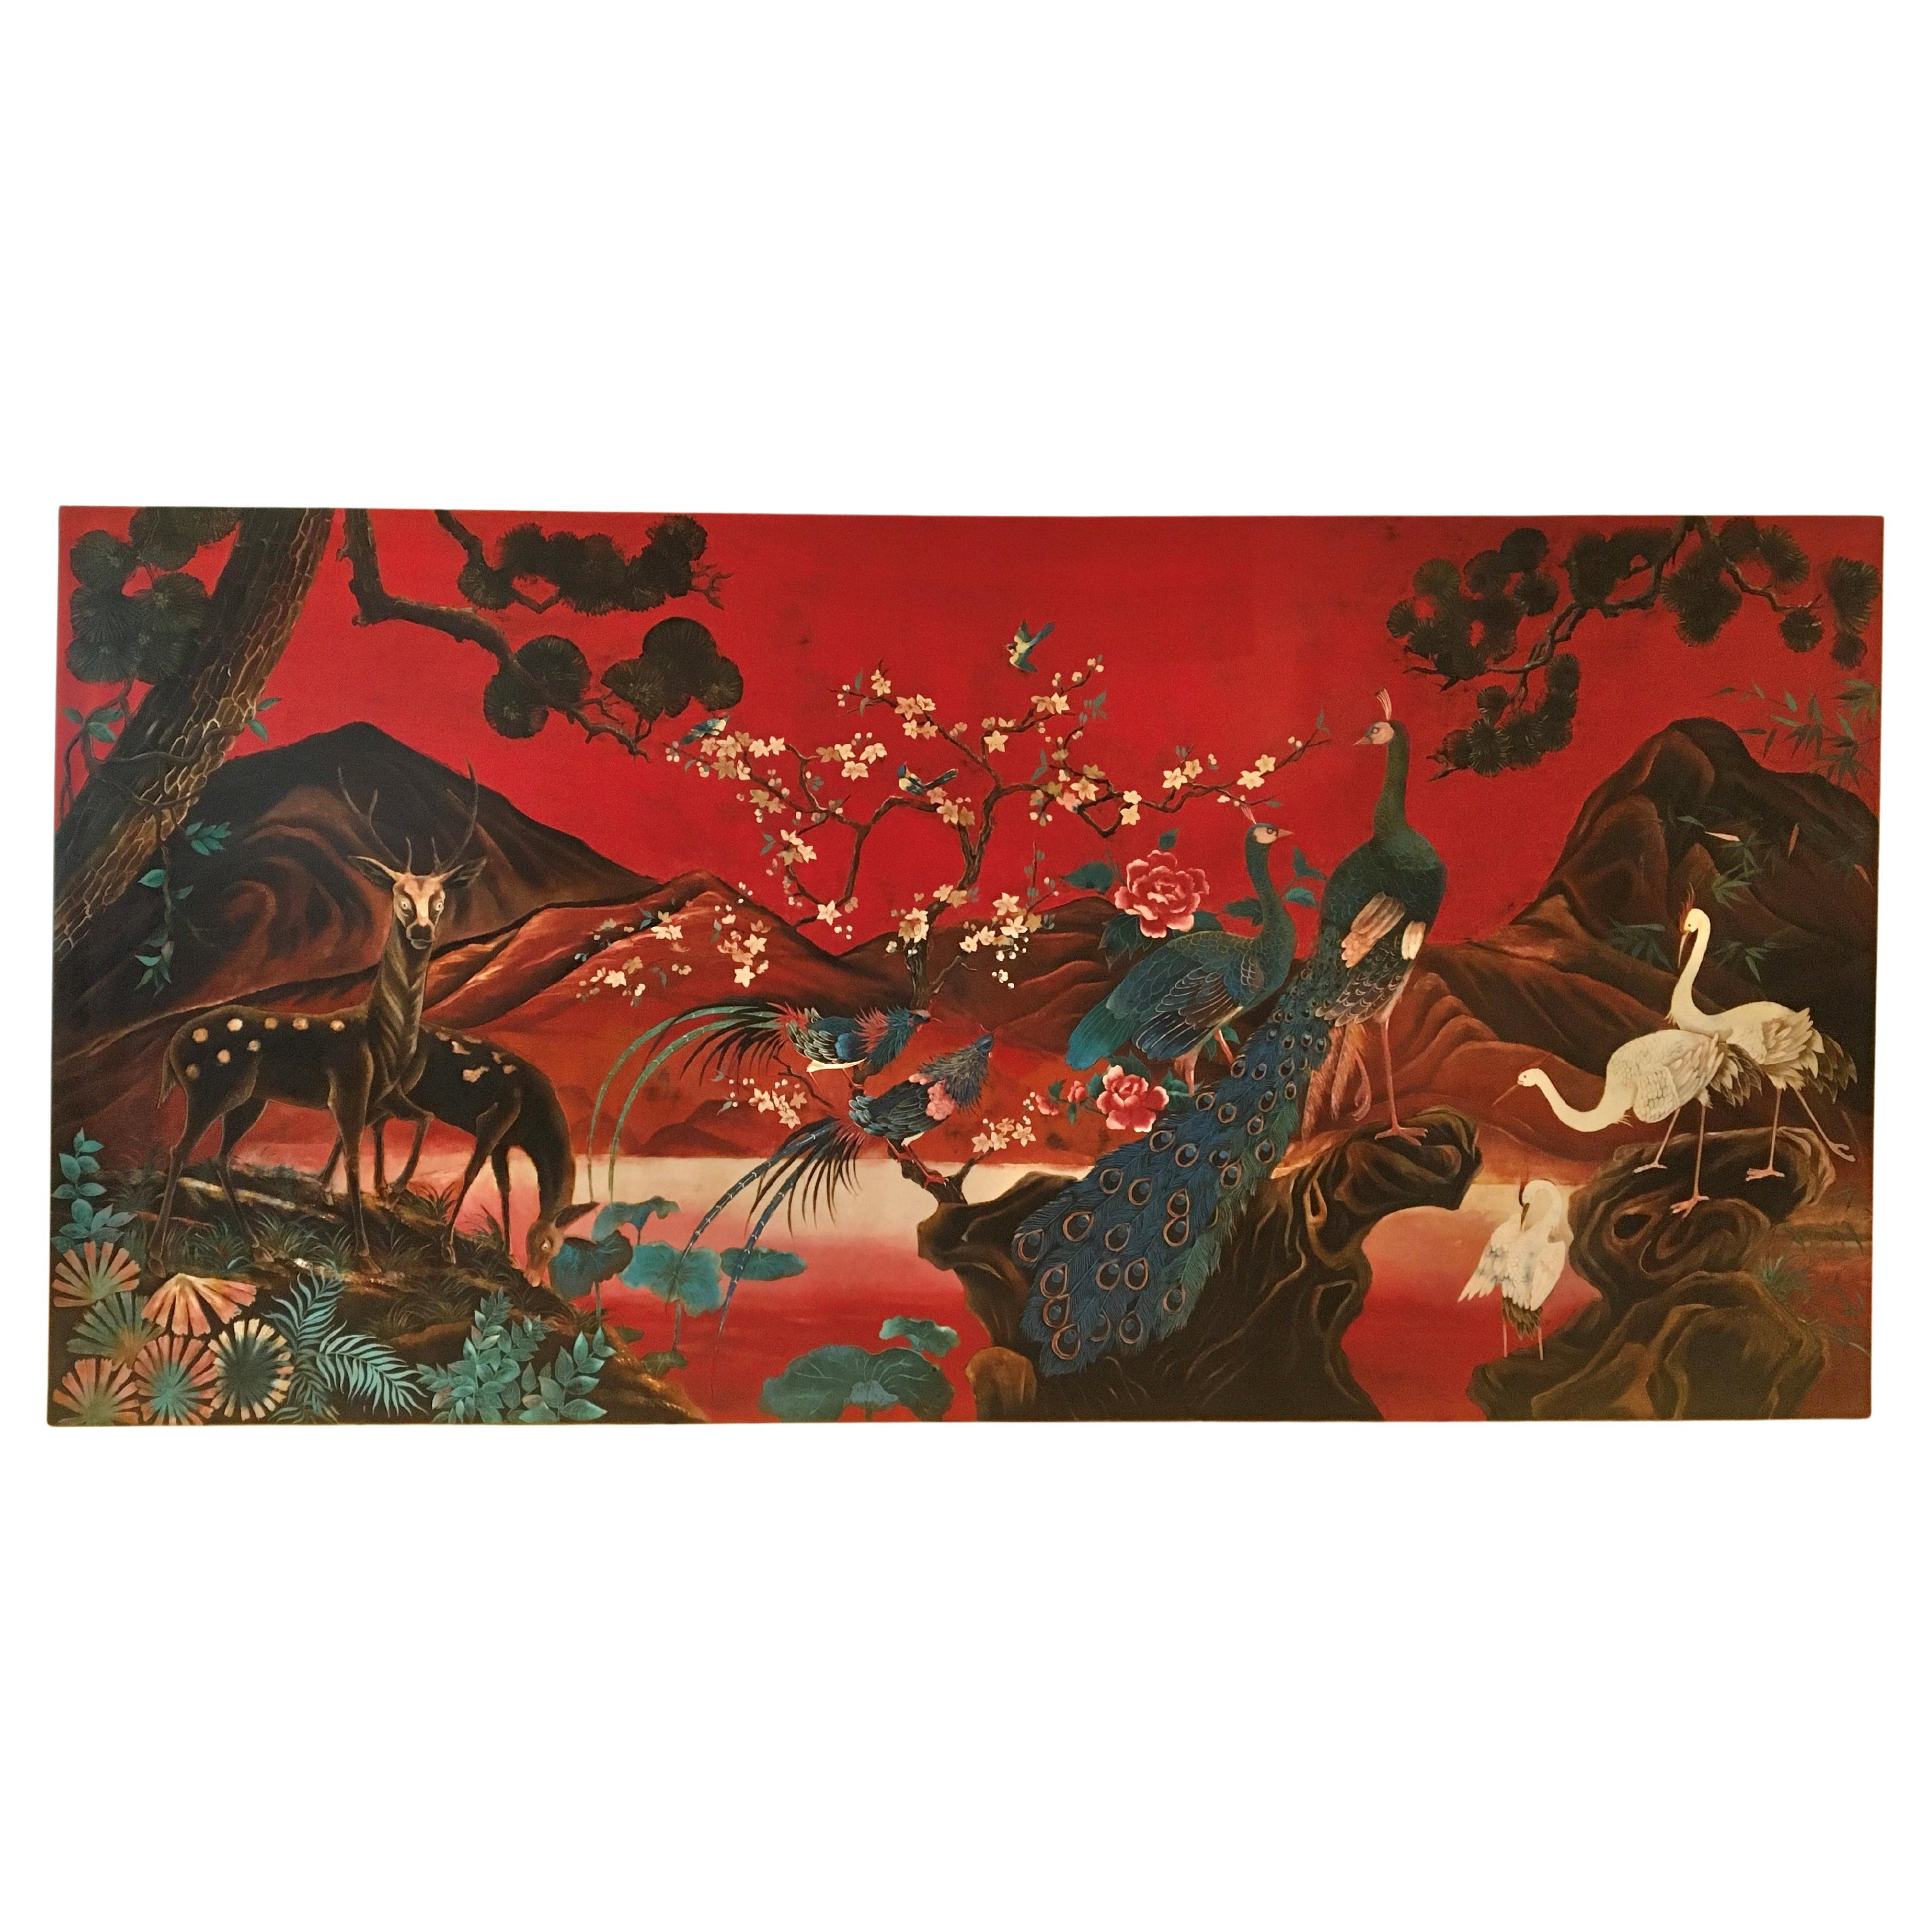 XL Asian Wall Panel with Peacock, Birds of Paradise, Cranes and Deers, 1990s